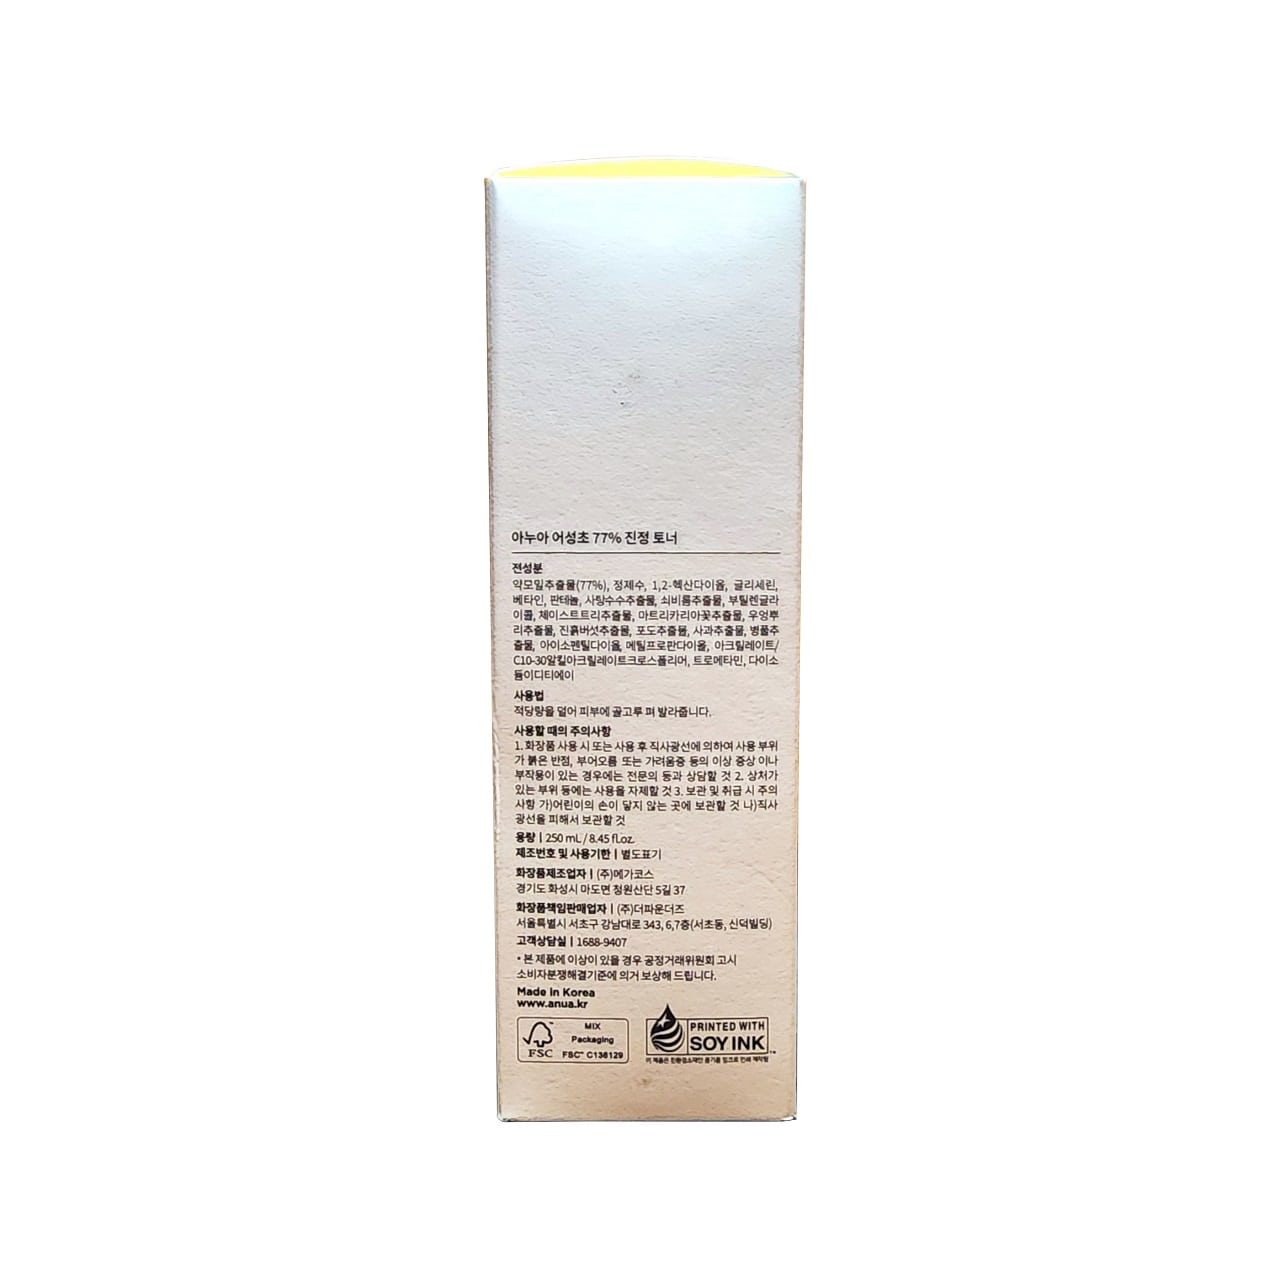 Ingredients, how to use, cautions for Anua Heartleaf 77% Soothing Toner (250 mL) in Korean